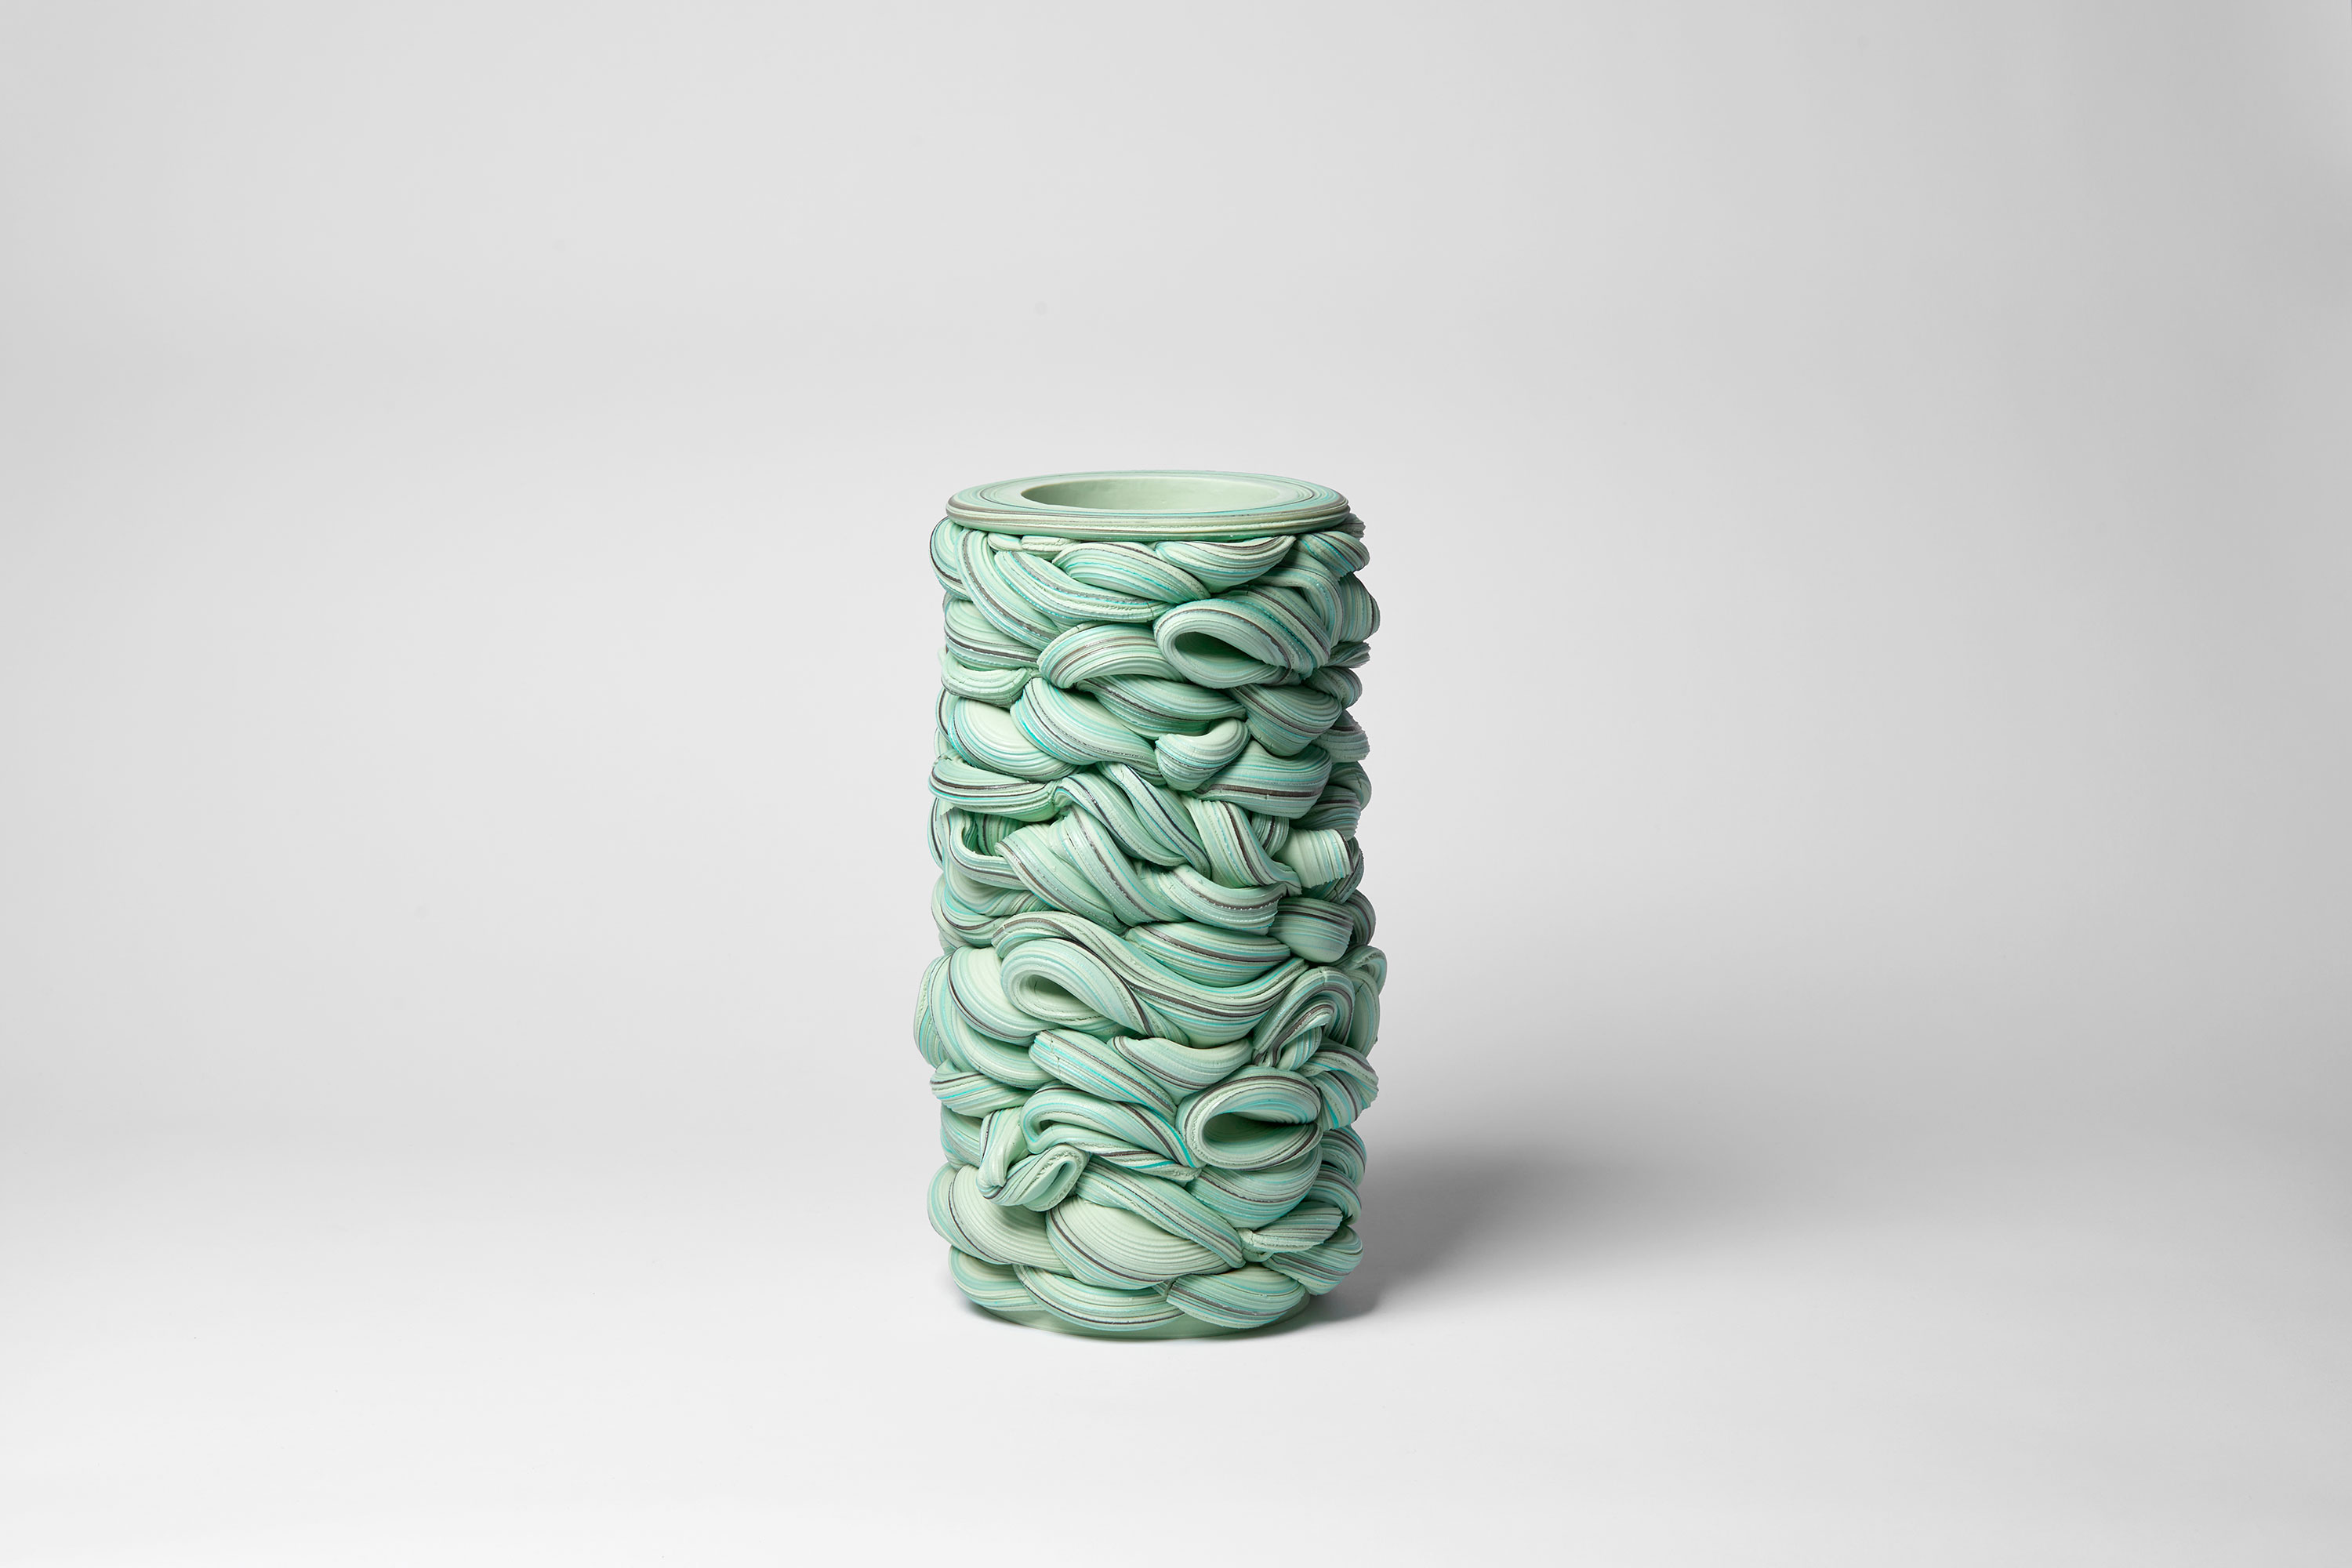 steven-edwards-exhibits-a-series-of-candy-like-ceramic-pieces-for-infinite-folds